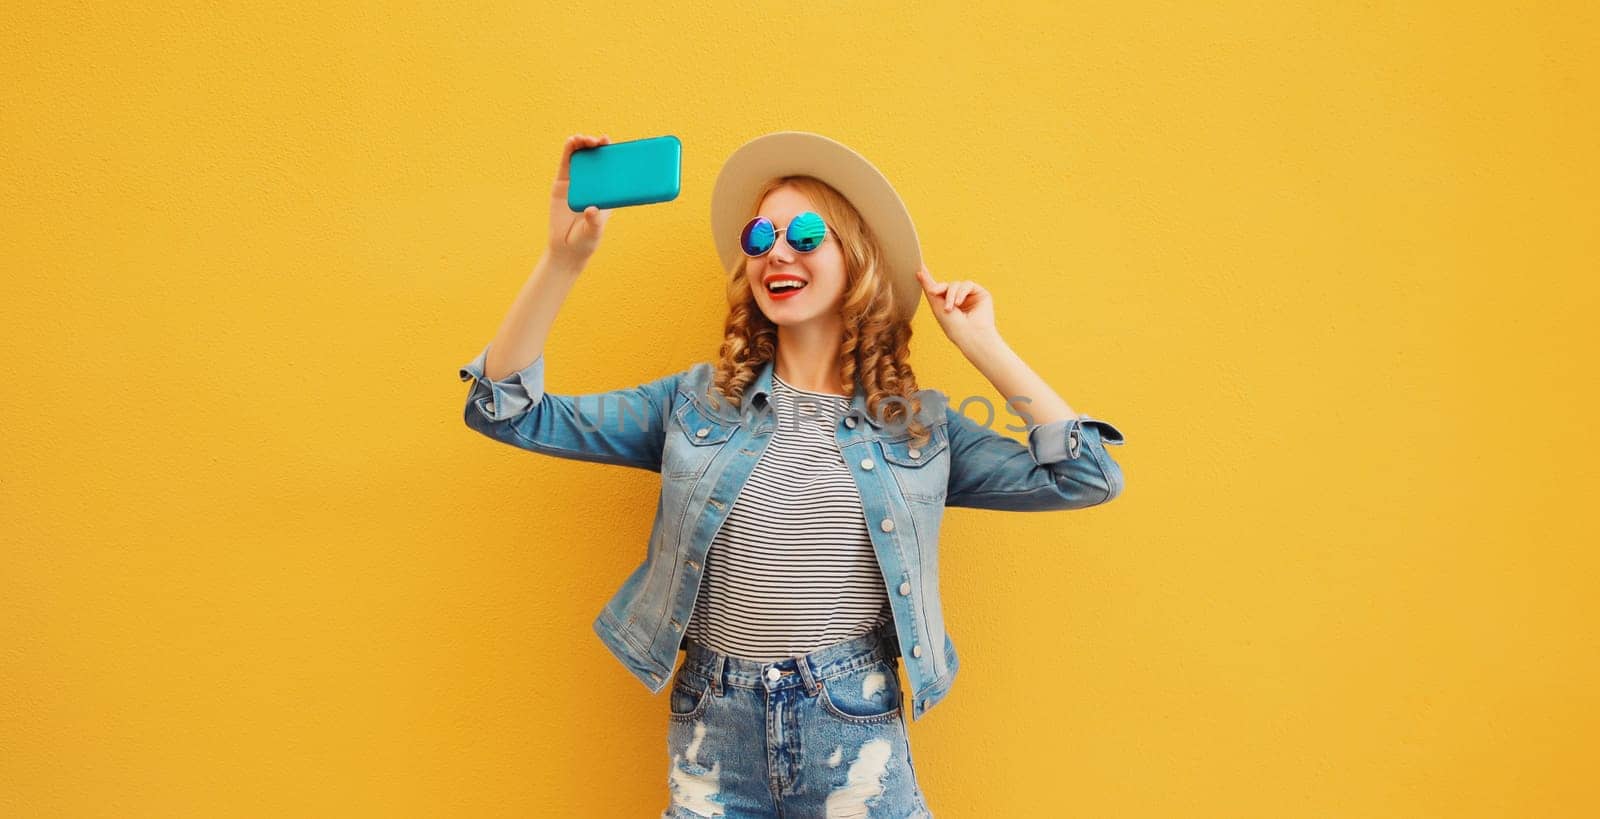 Portrait of happy smiling young woman taking selfie with smartphone wearing summer tourist straw hat, denim clothing on yellow background